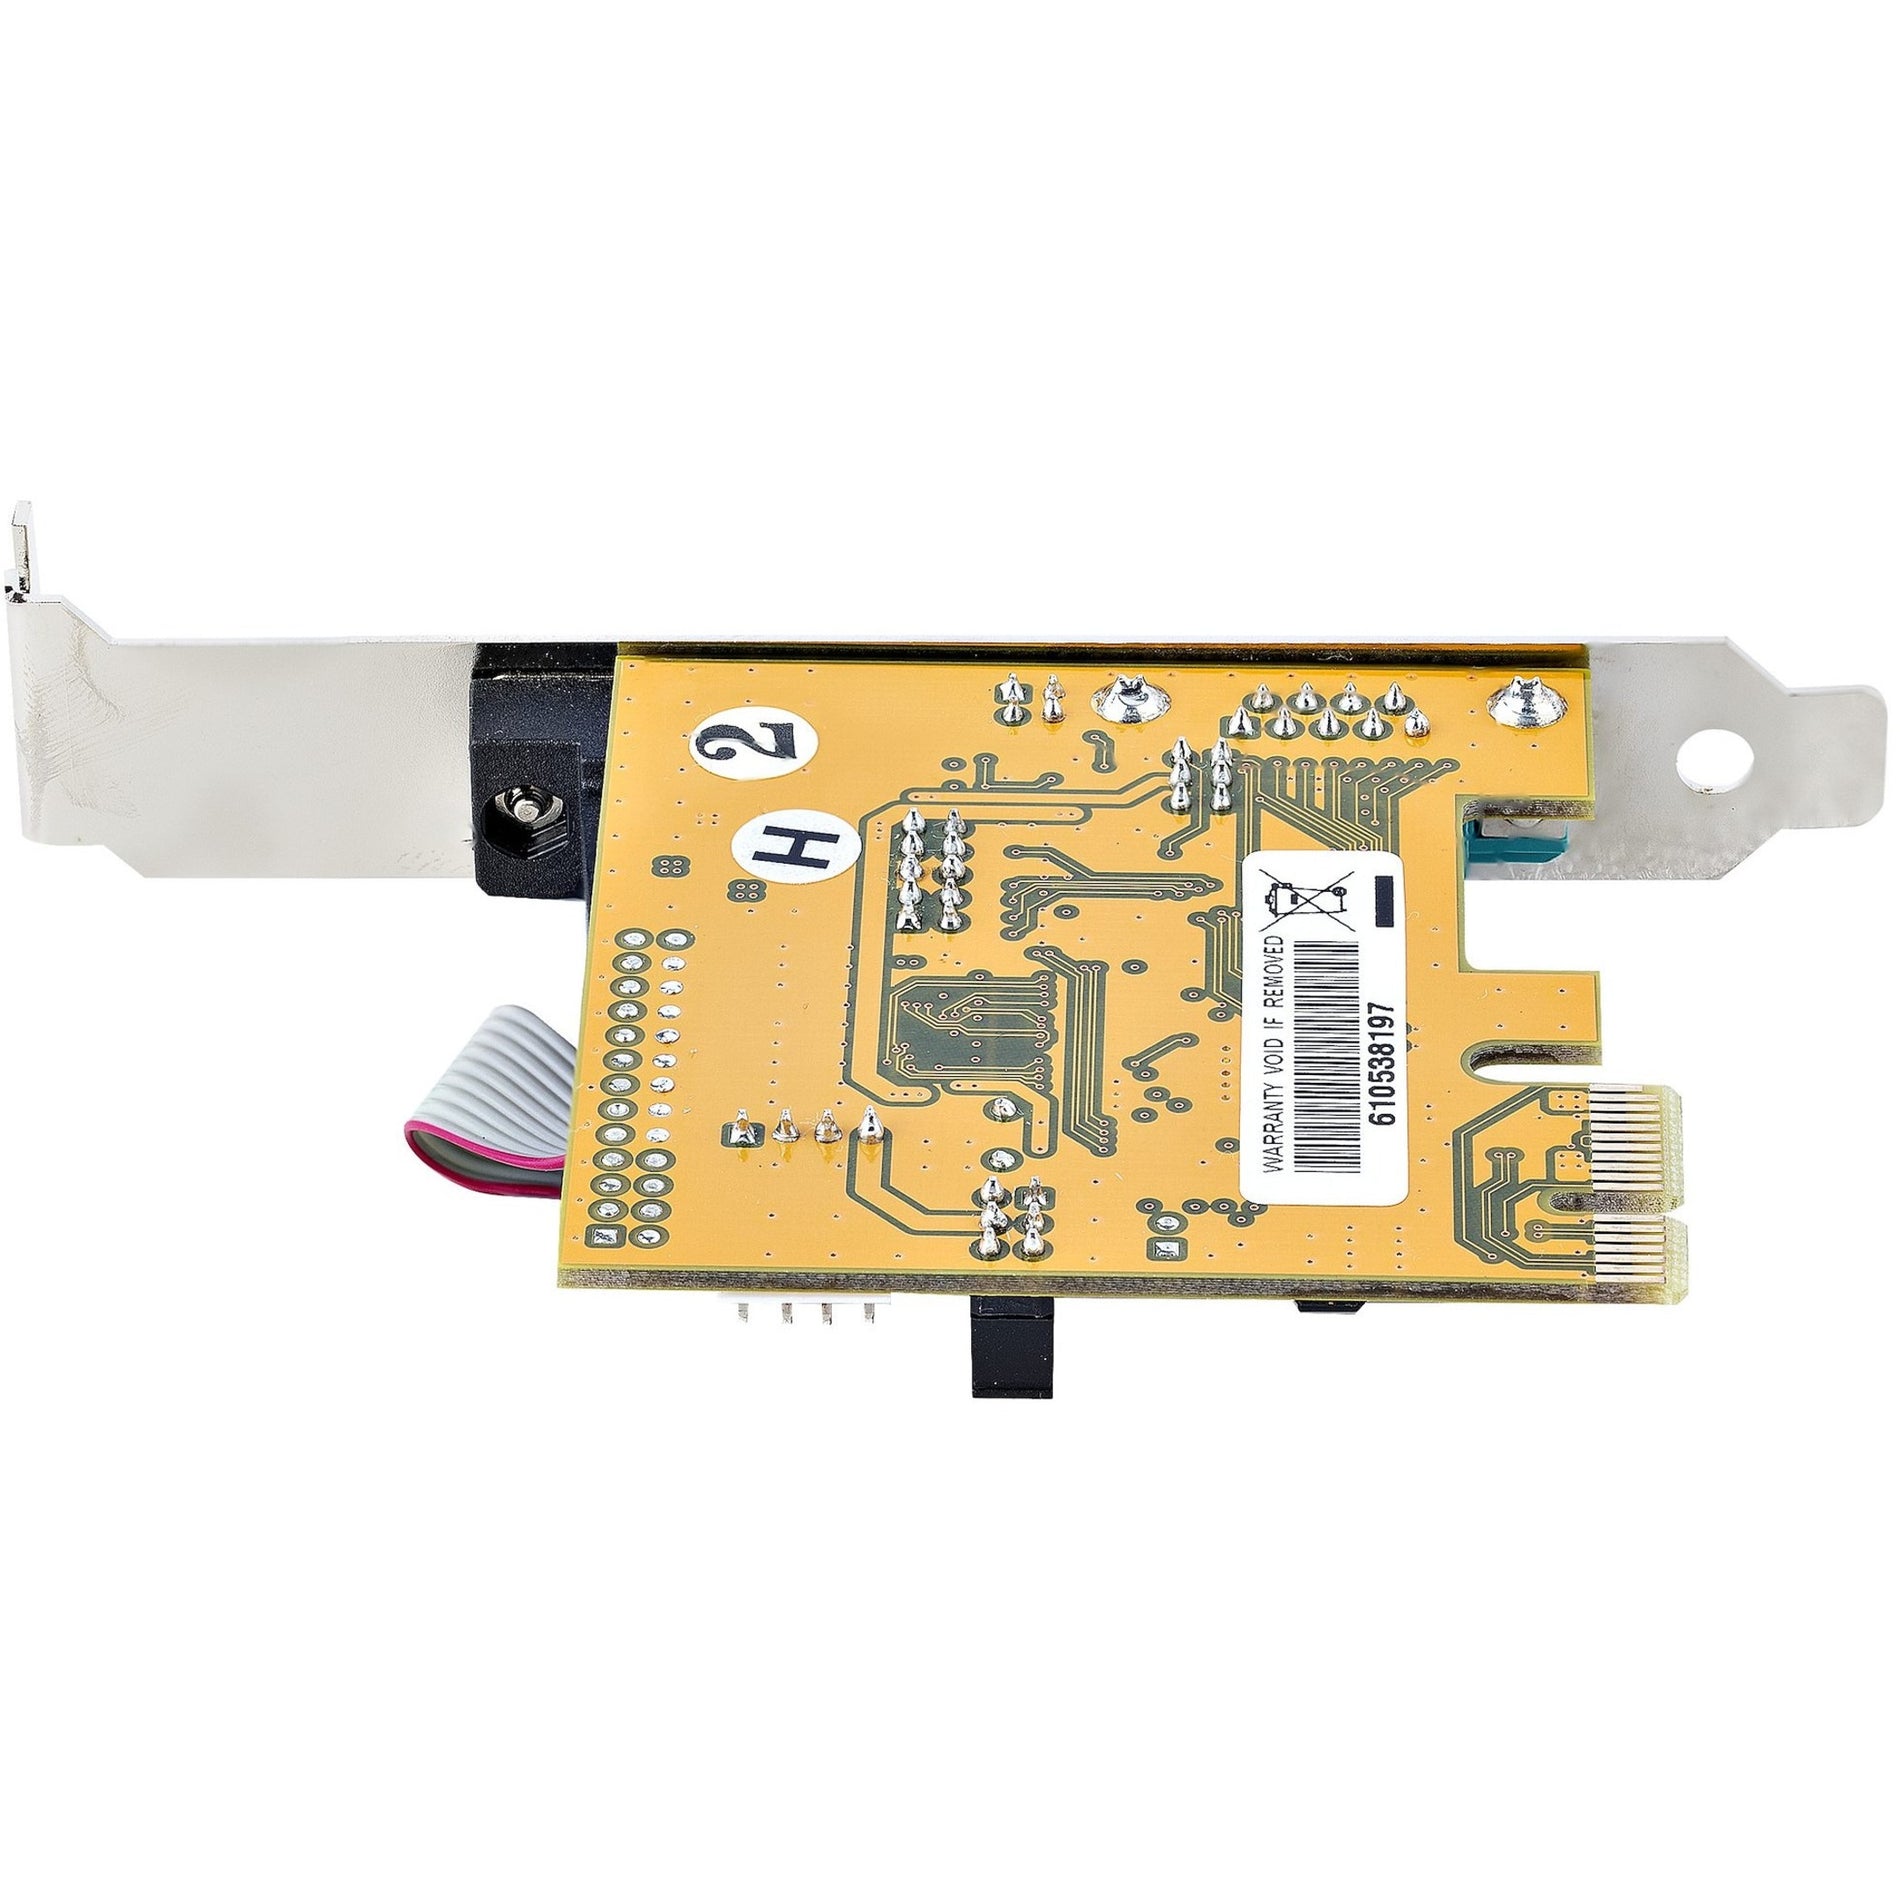 StarTech.com 21050-PC-SERIAL-CARD Two-port PCIe Serial Card, 2 Serial Ports, RoHS & WEEE Certified